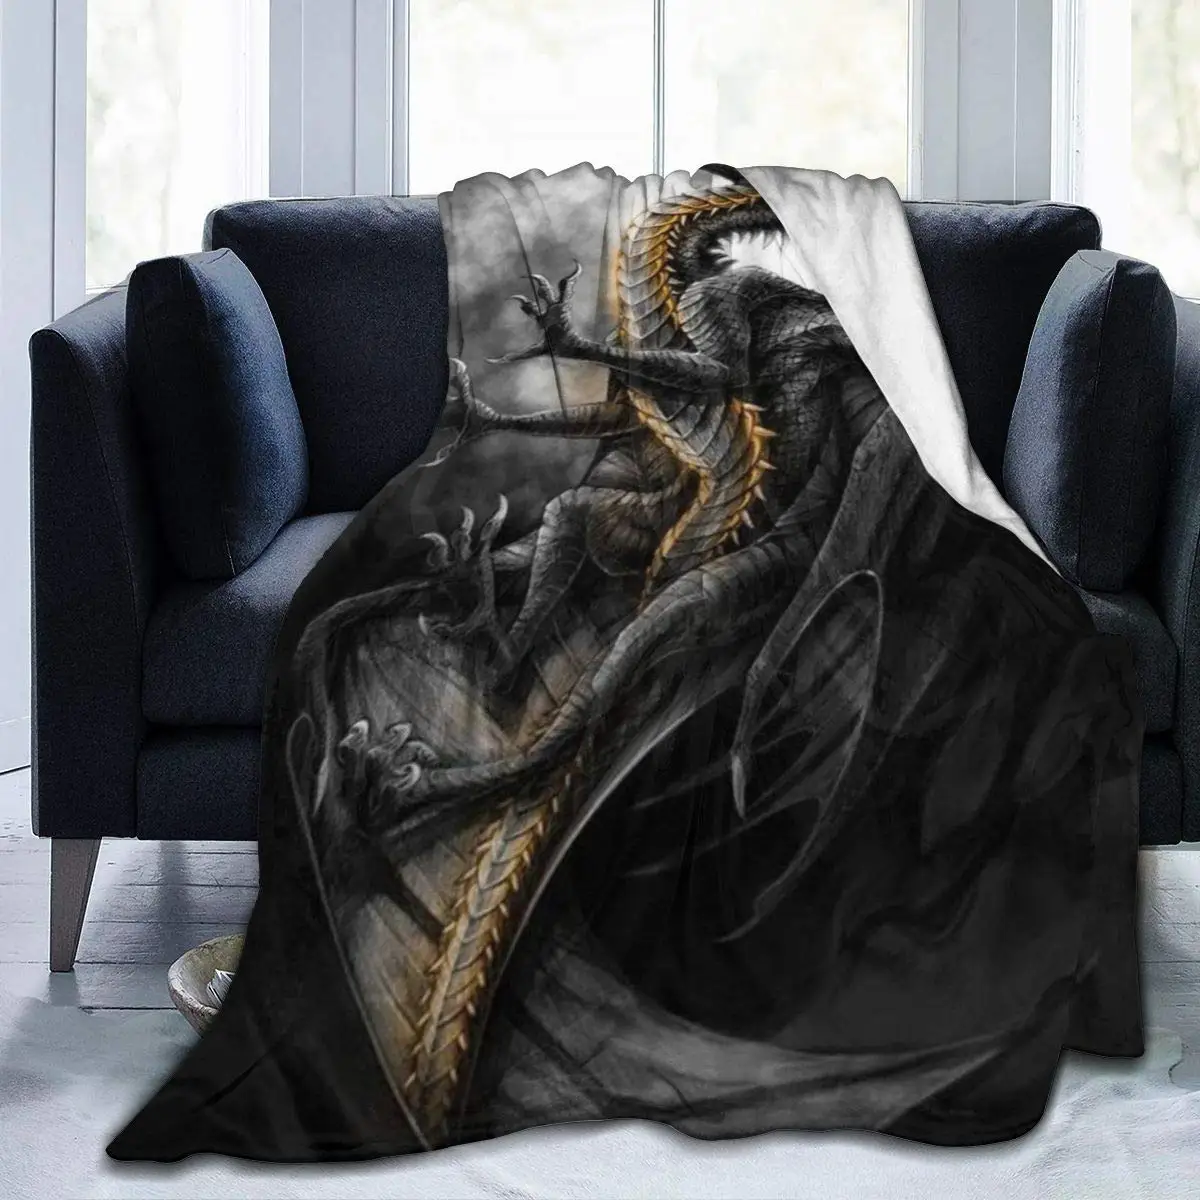 

Keep Warm Sherpa Flannel Throw Blankets for Sofa Couch Winter Autumn Comfy Soft Oversized School Blanket Cloak Cool Fierce Evil